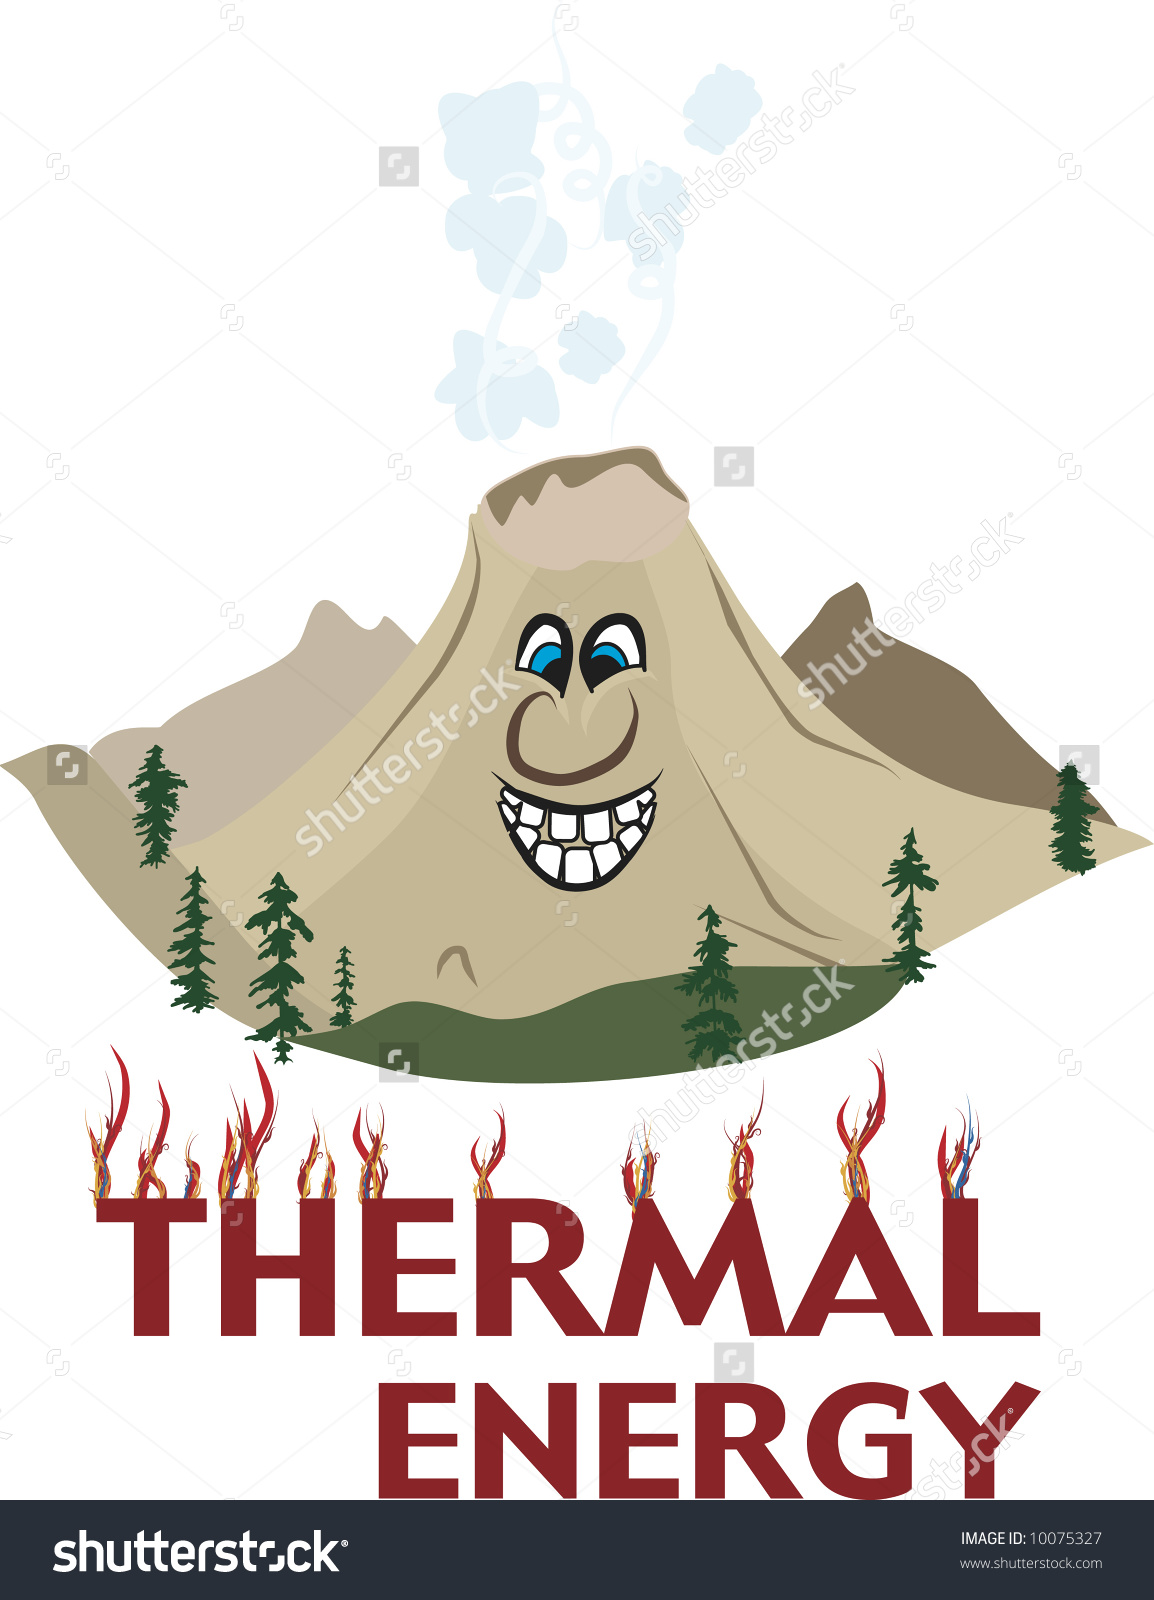 What are examples of thermal energy?